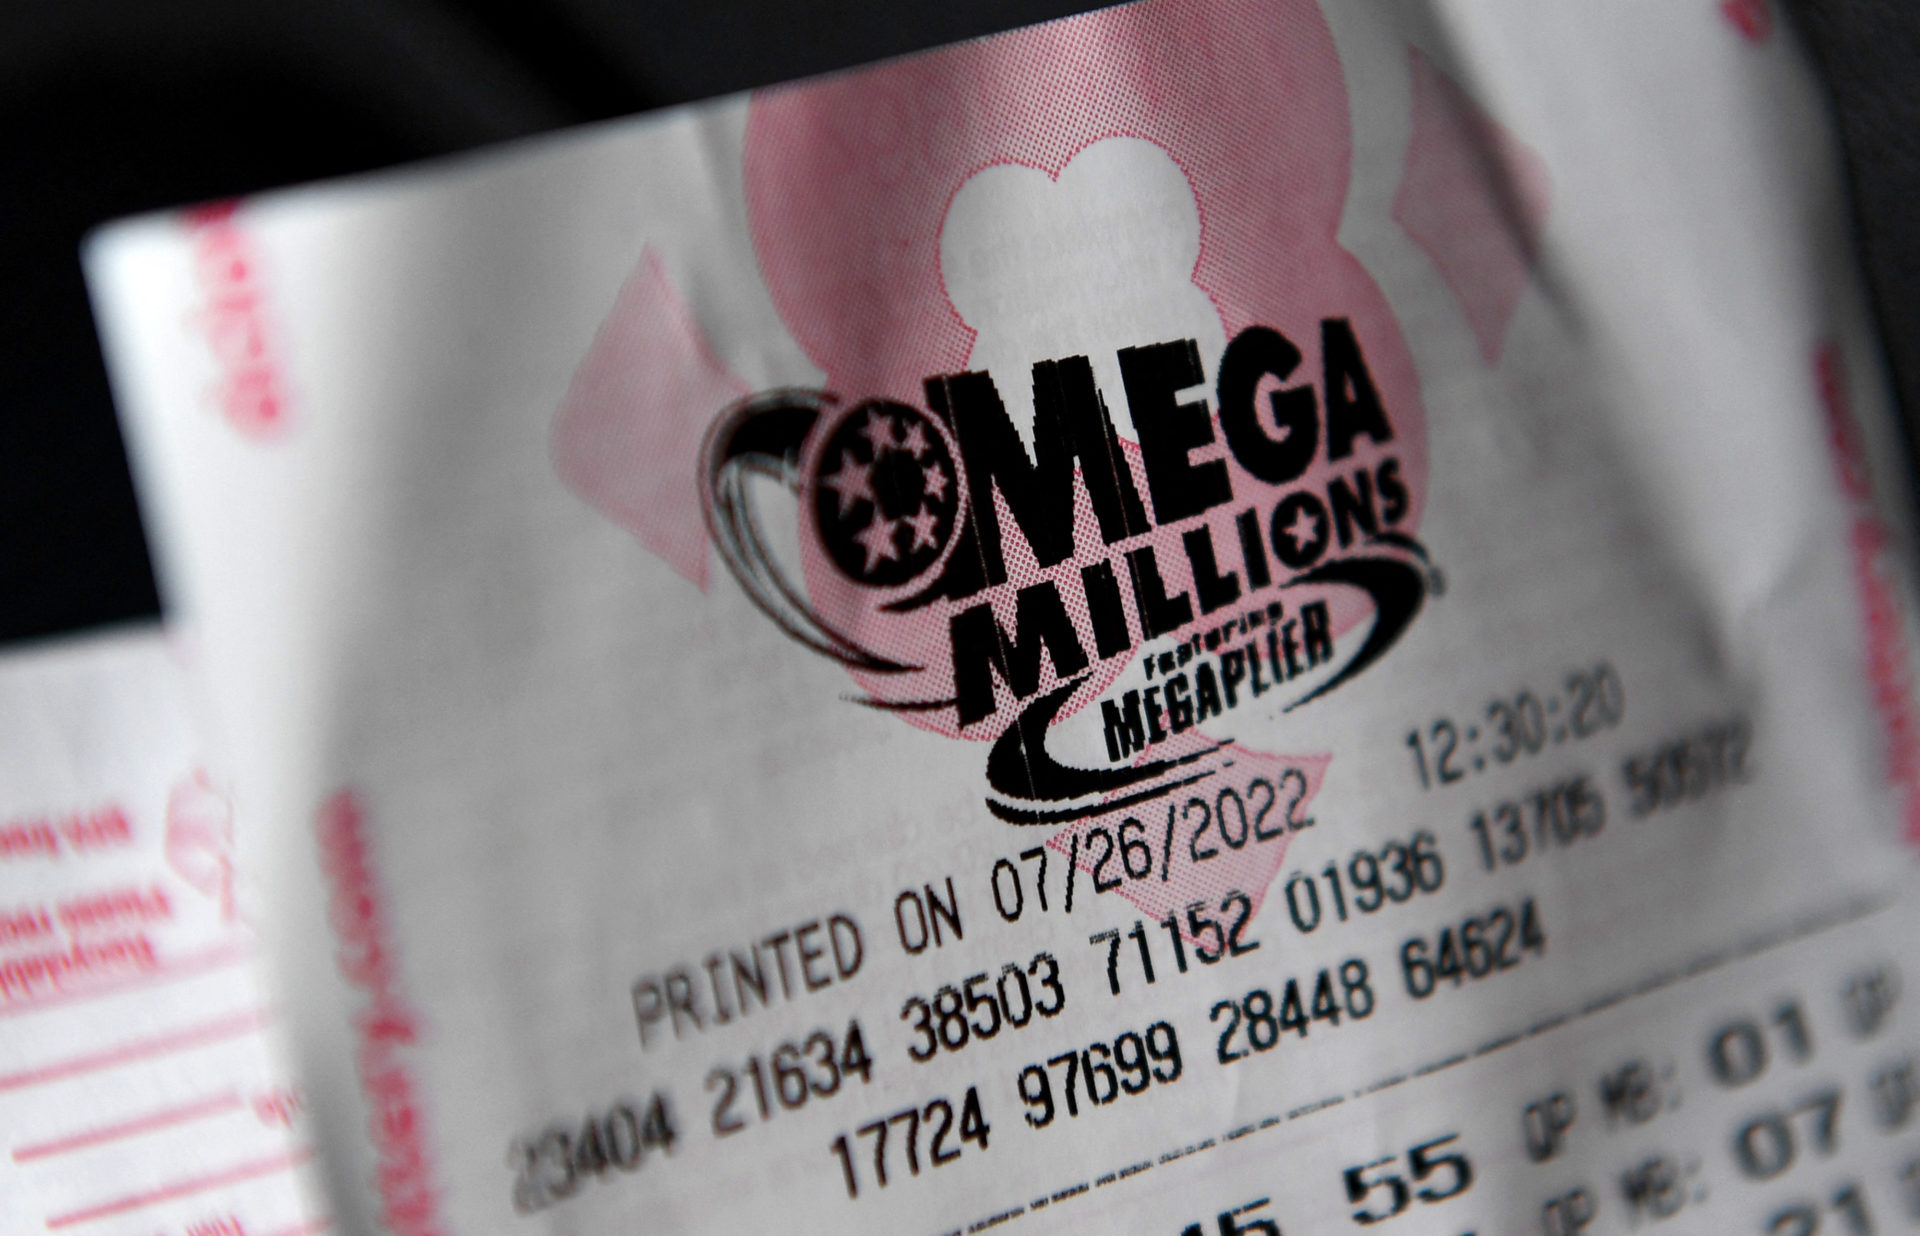 Mega Millions' next drawing in 2022 is sooner than you think